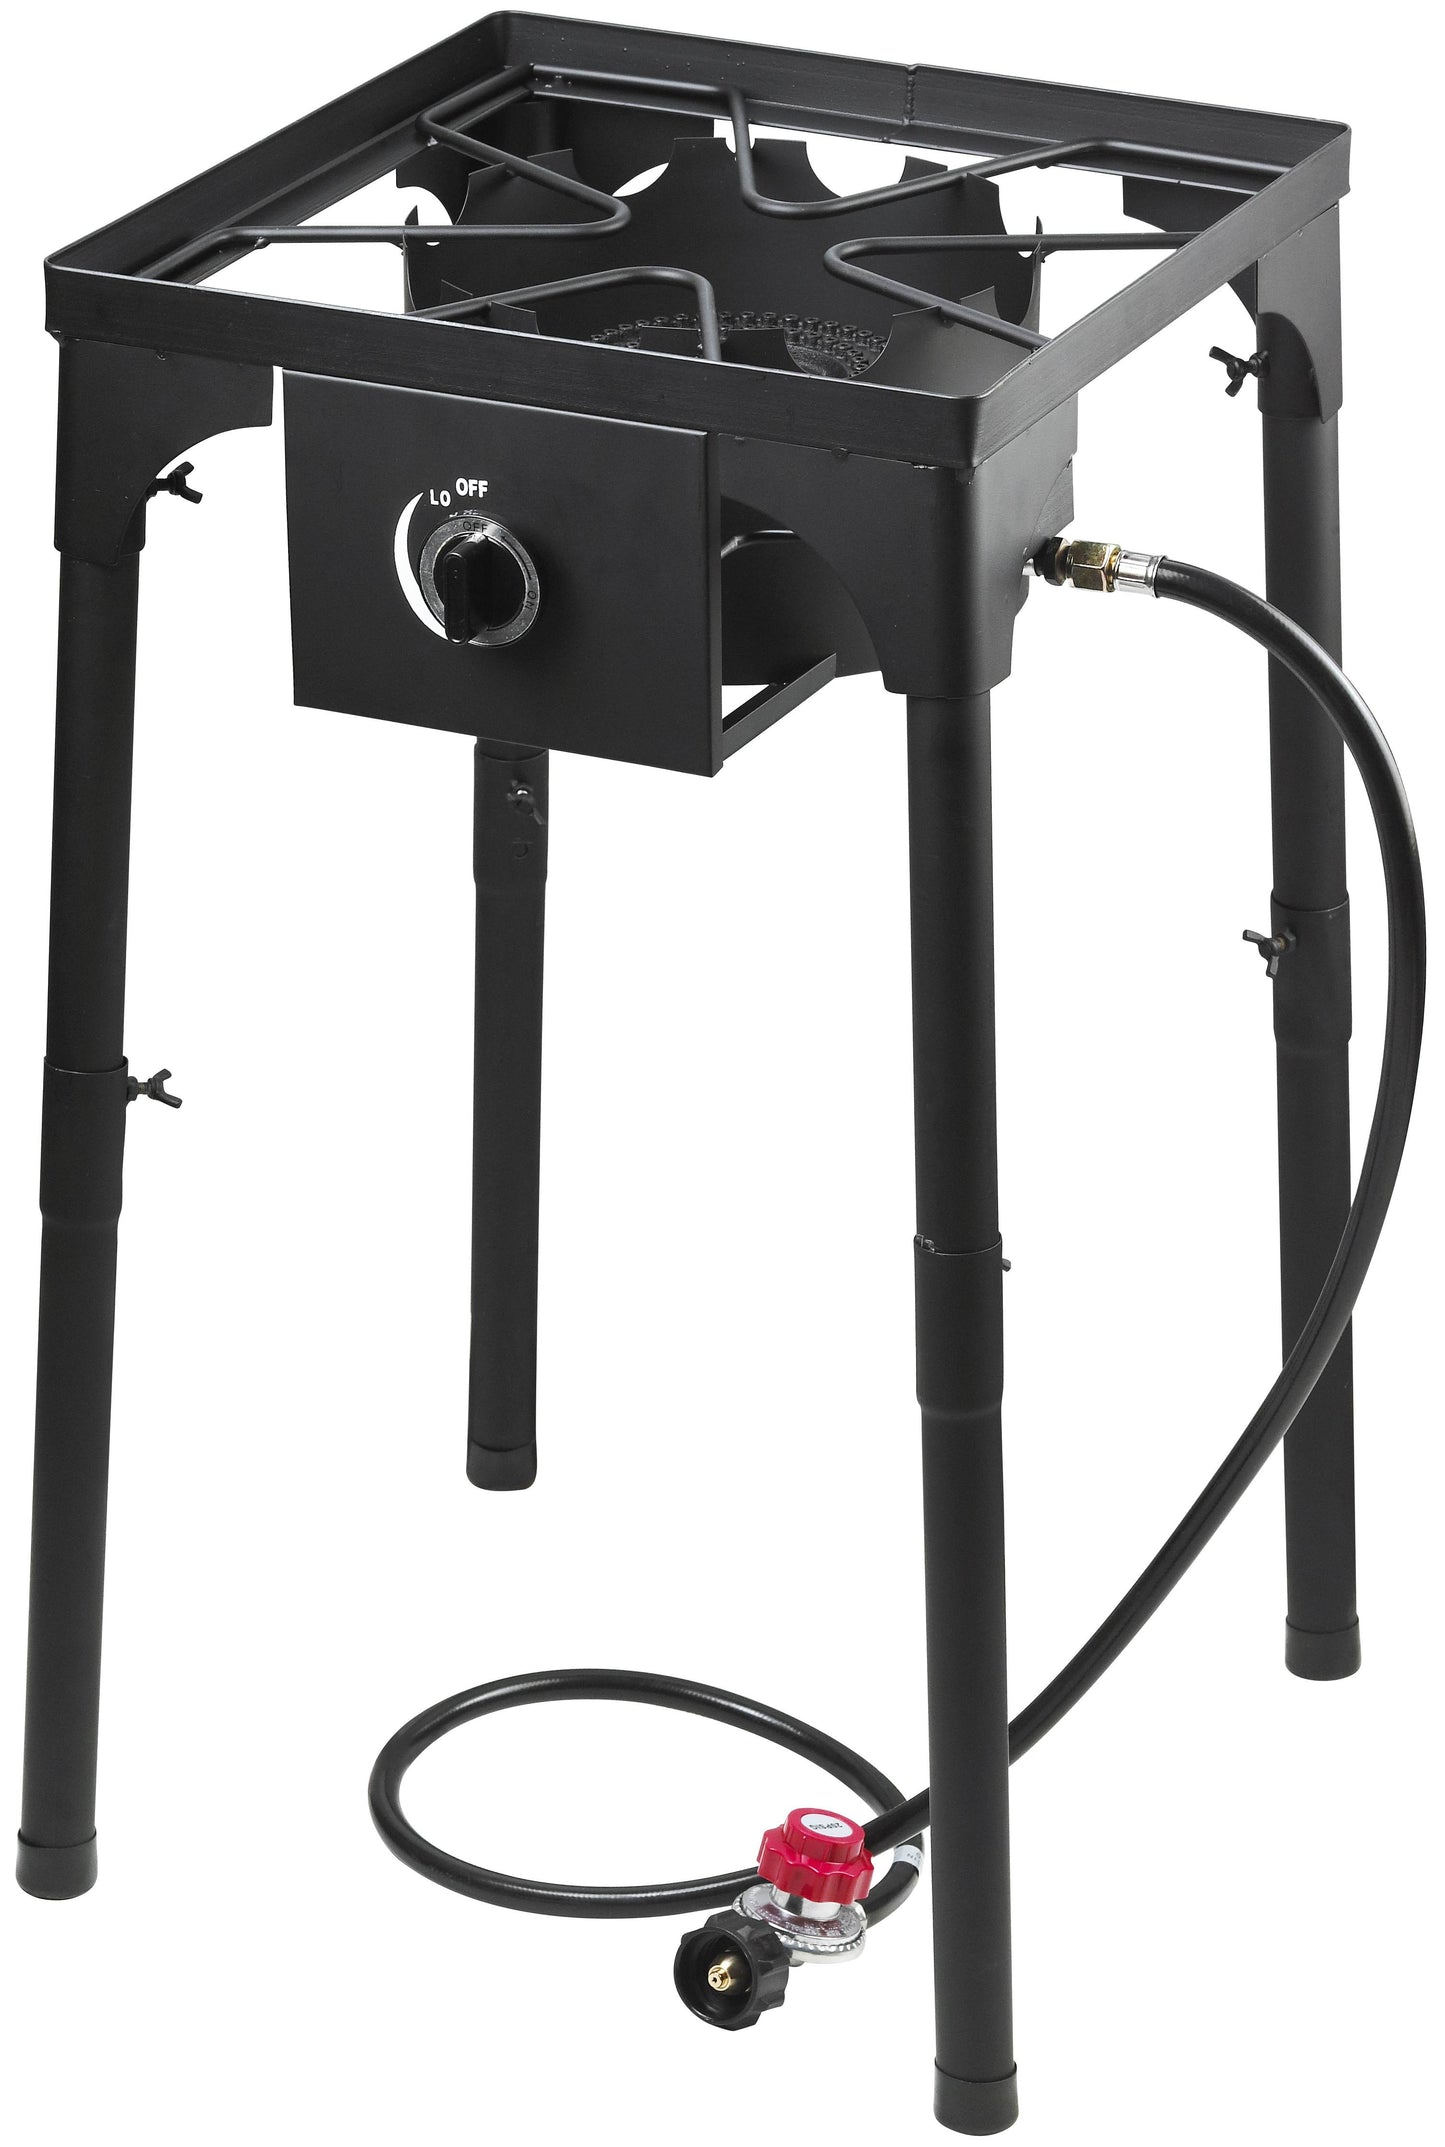 ZB-107: Outdoor High Pressure Propane Burner with Adjustable Square Stand